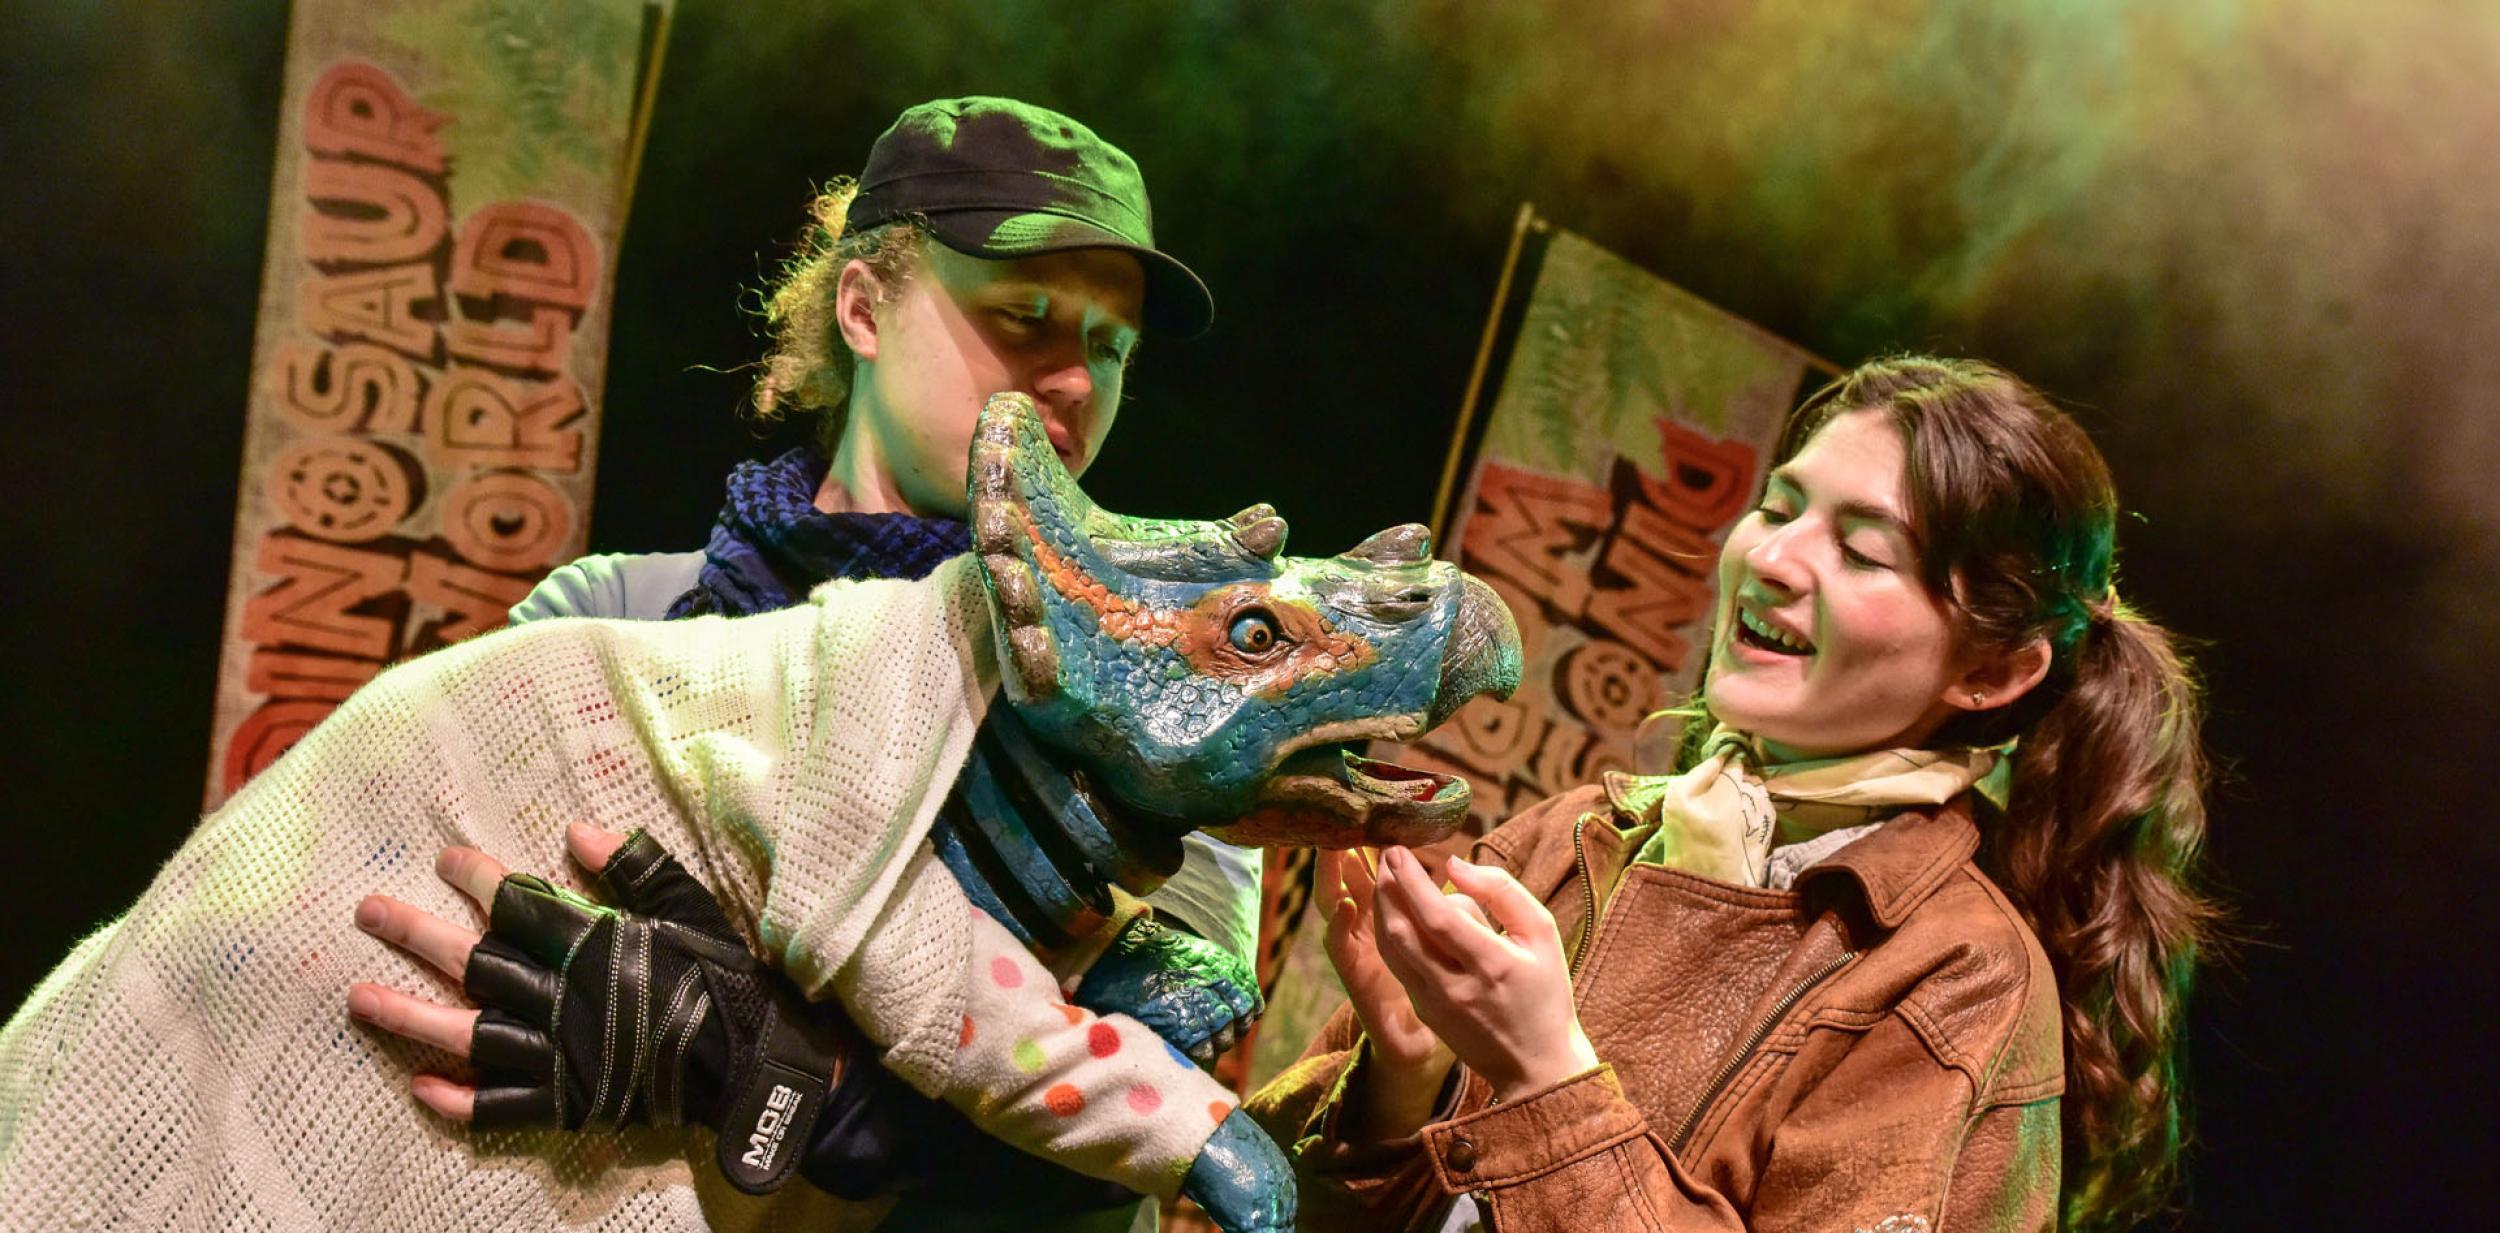 Dinosaur puppet with 2 puppeteers